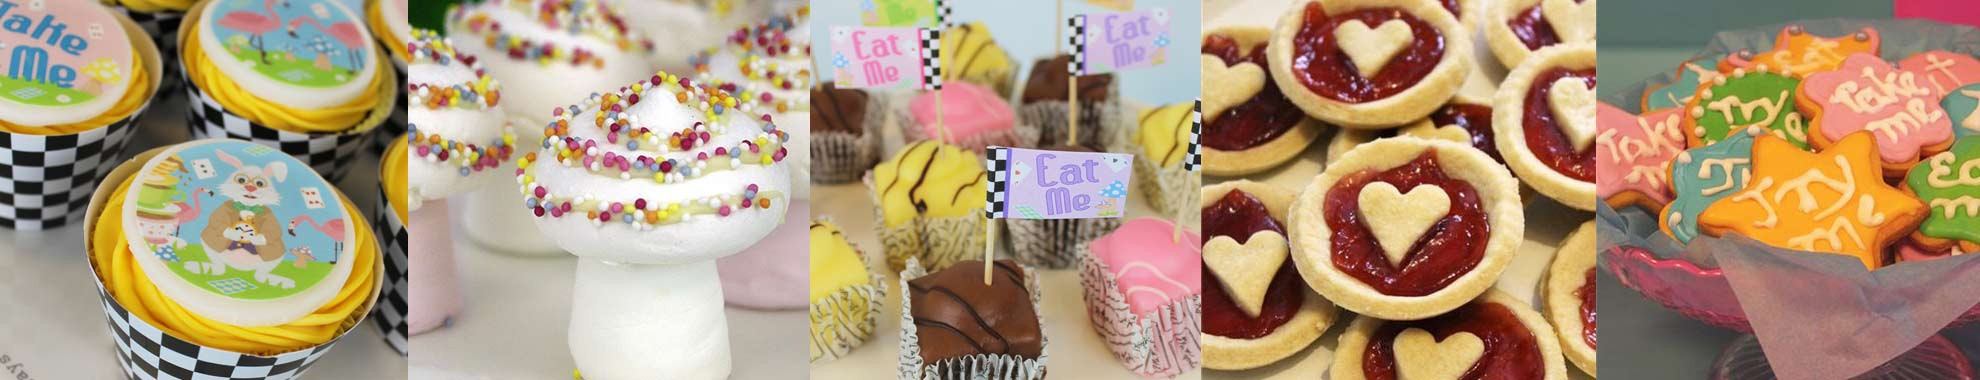 Mad Hatter Themed Tea Party Food Ideas
 Mad Hatters Tea Party Food Ideas creative party food